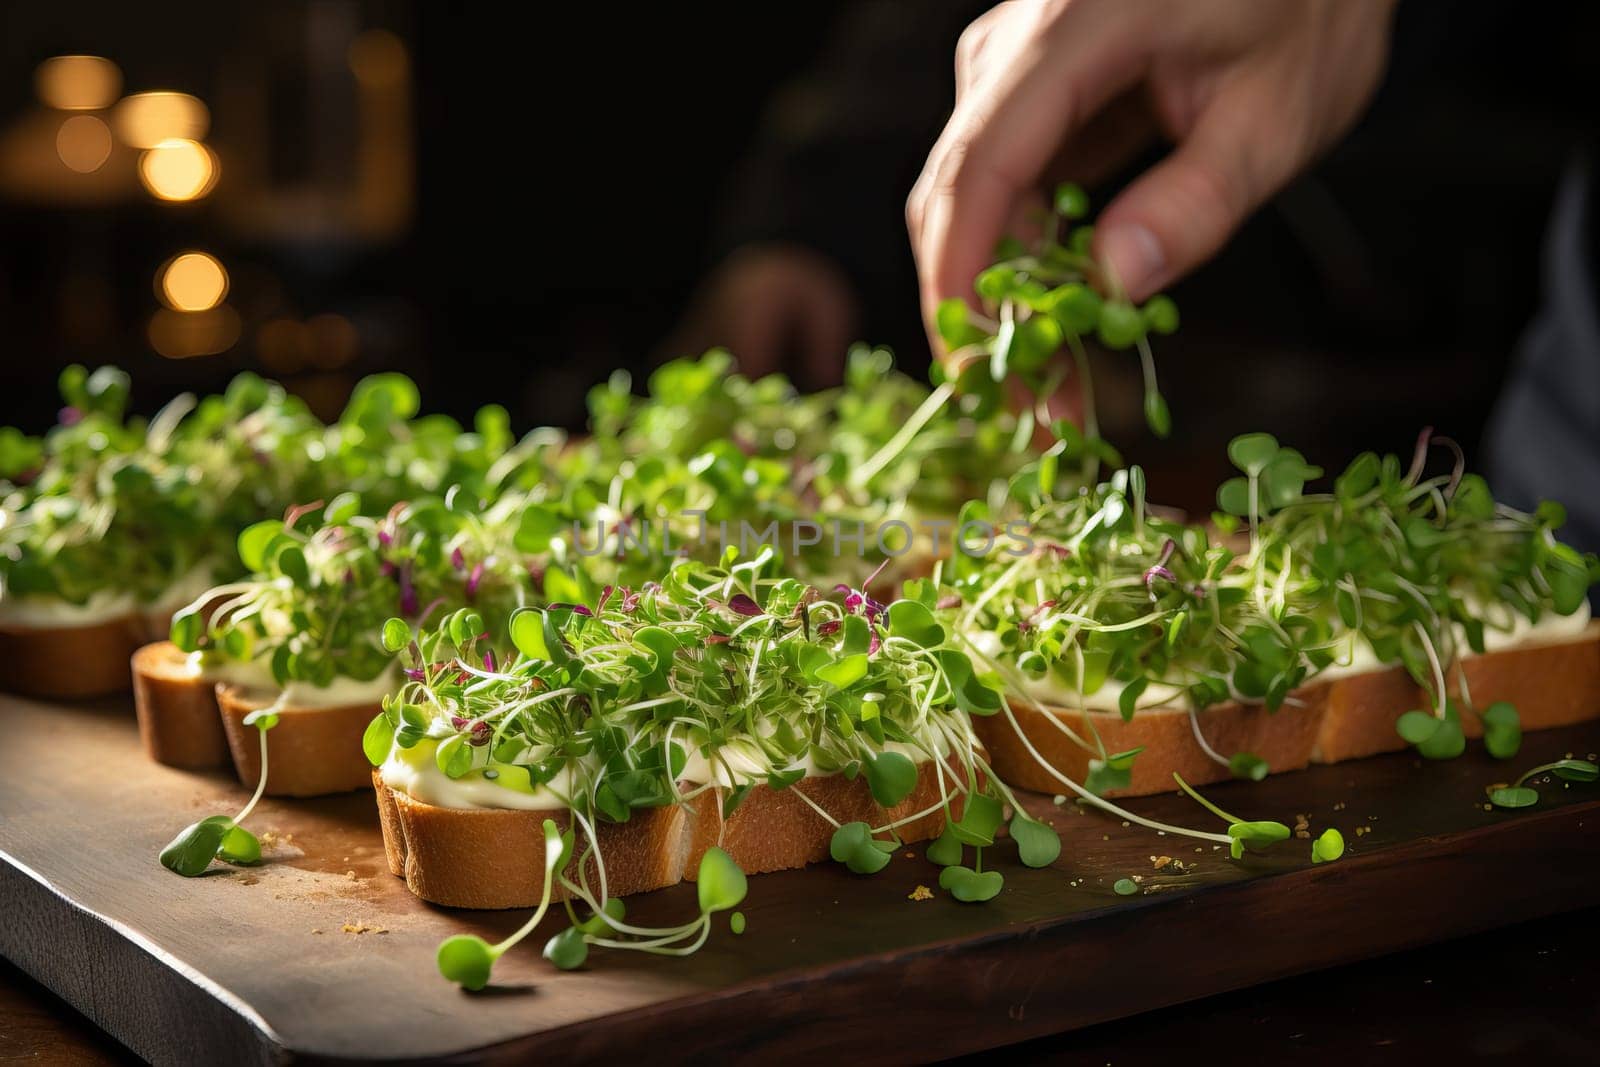 A person puts microgreens on a sandwich, useful microgreens for healthy eating. Pieces of bread are covered with green microgreens for a healthy breakfast.